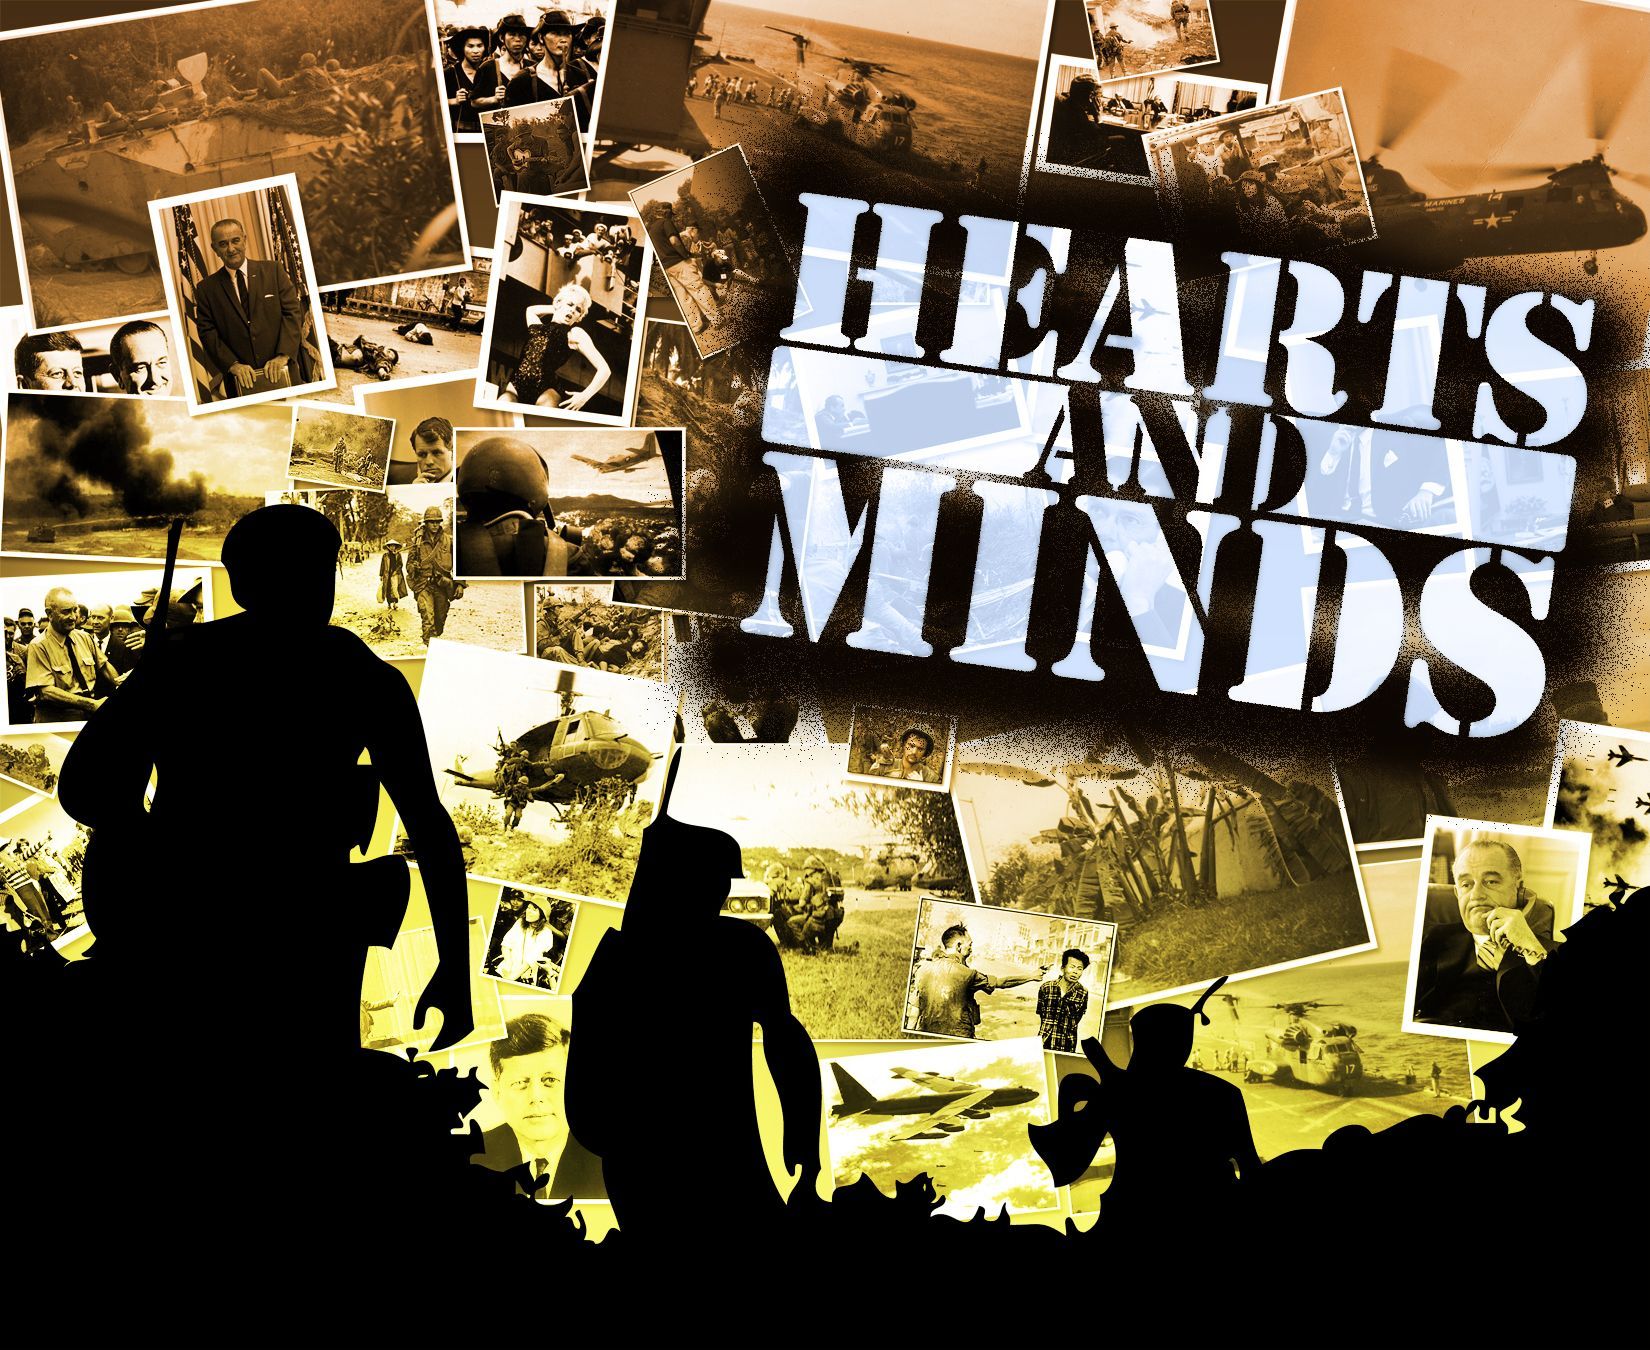 Hearts and Minds: Vietnam 1965-1975